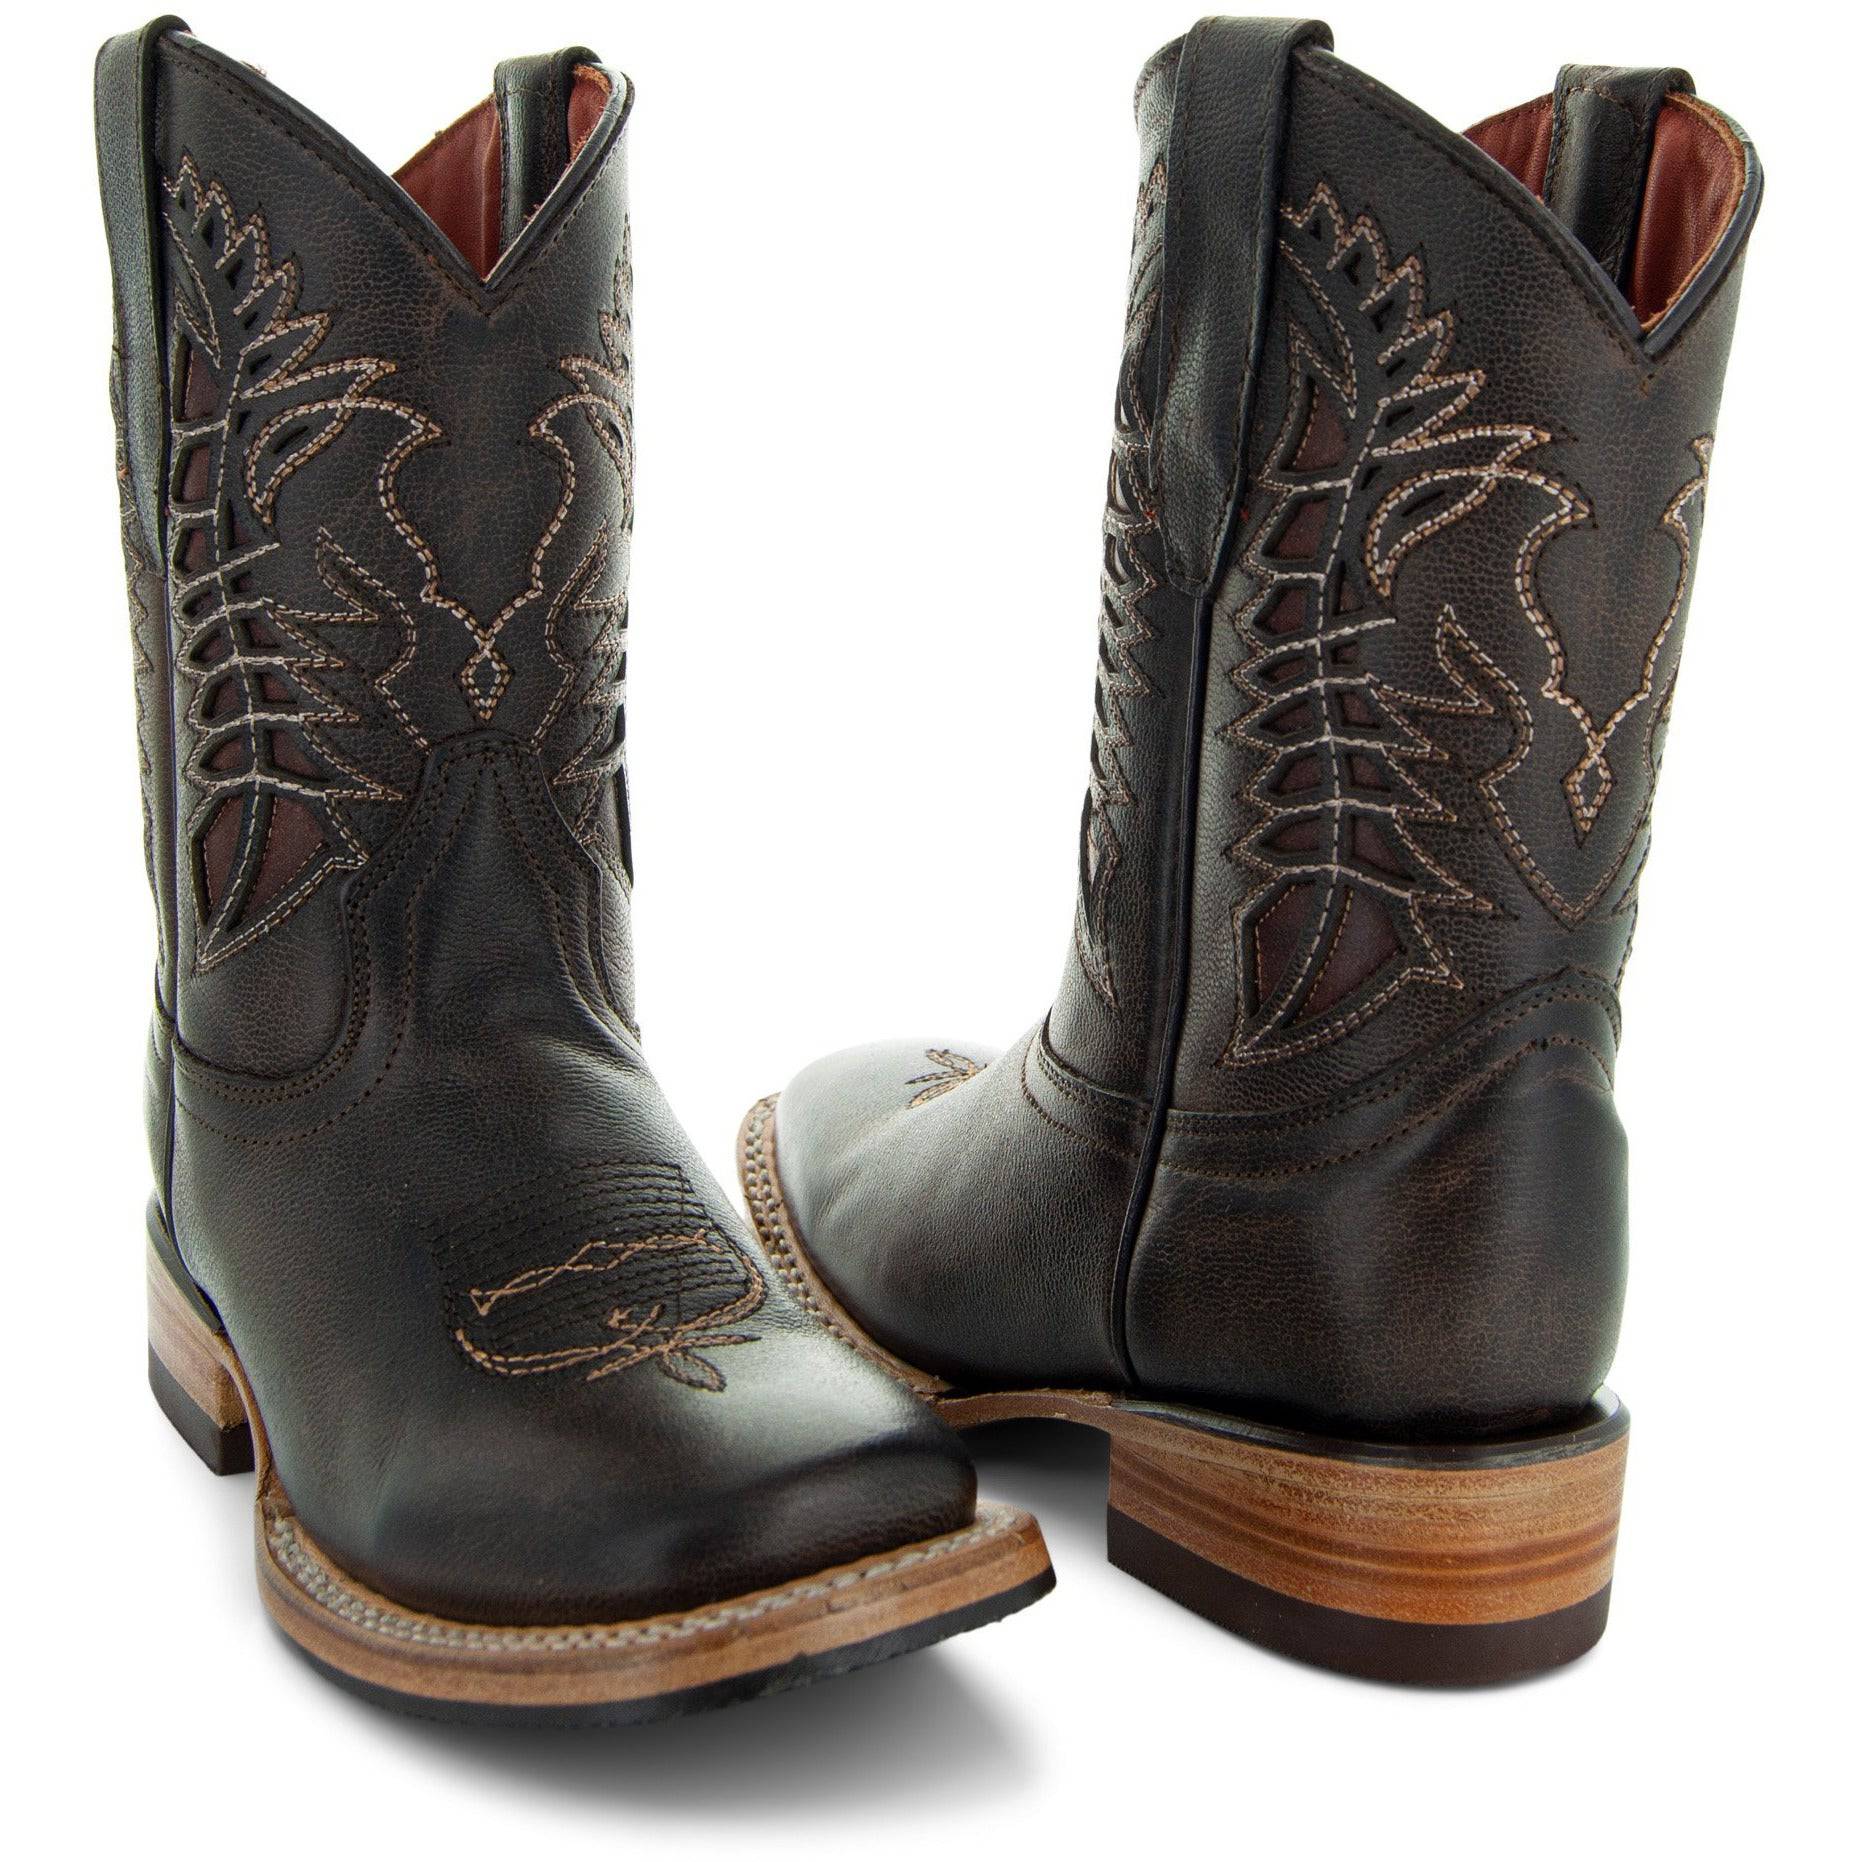 Kids' Brown Country Boots  Everyday Western Boots for Kids K3007